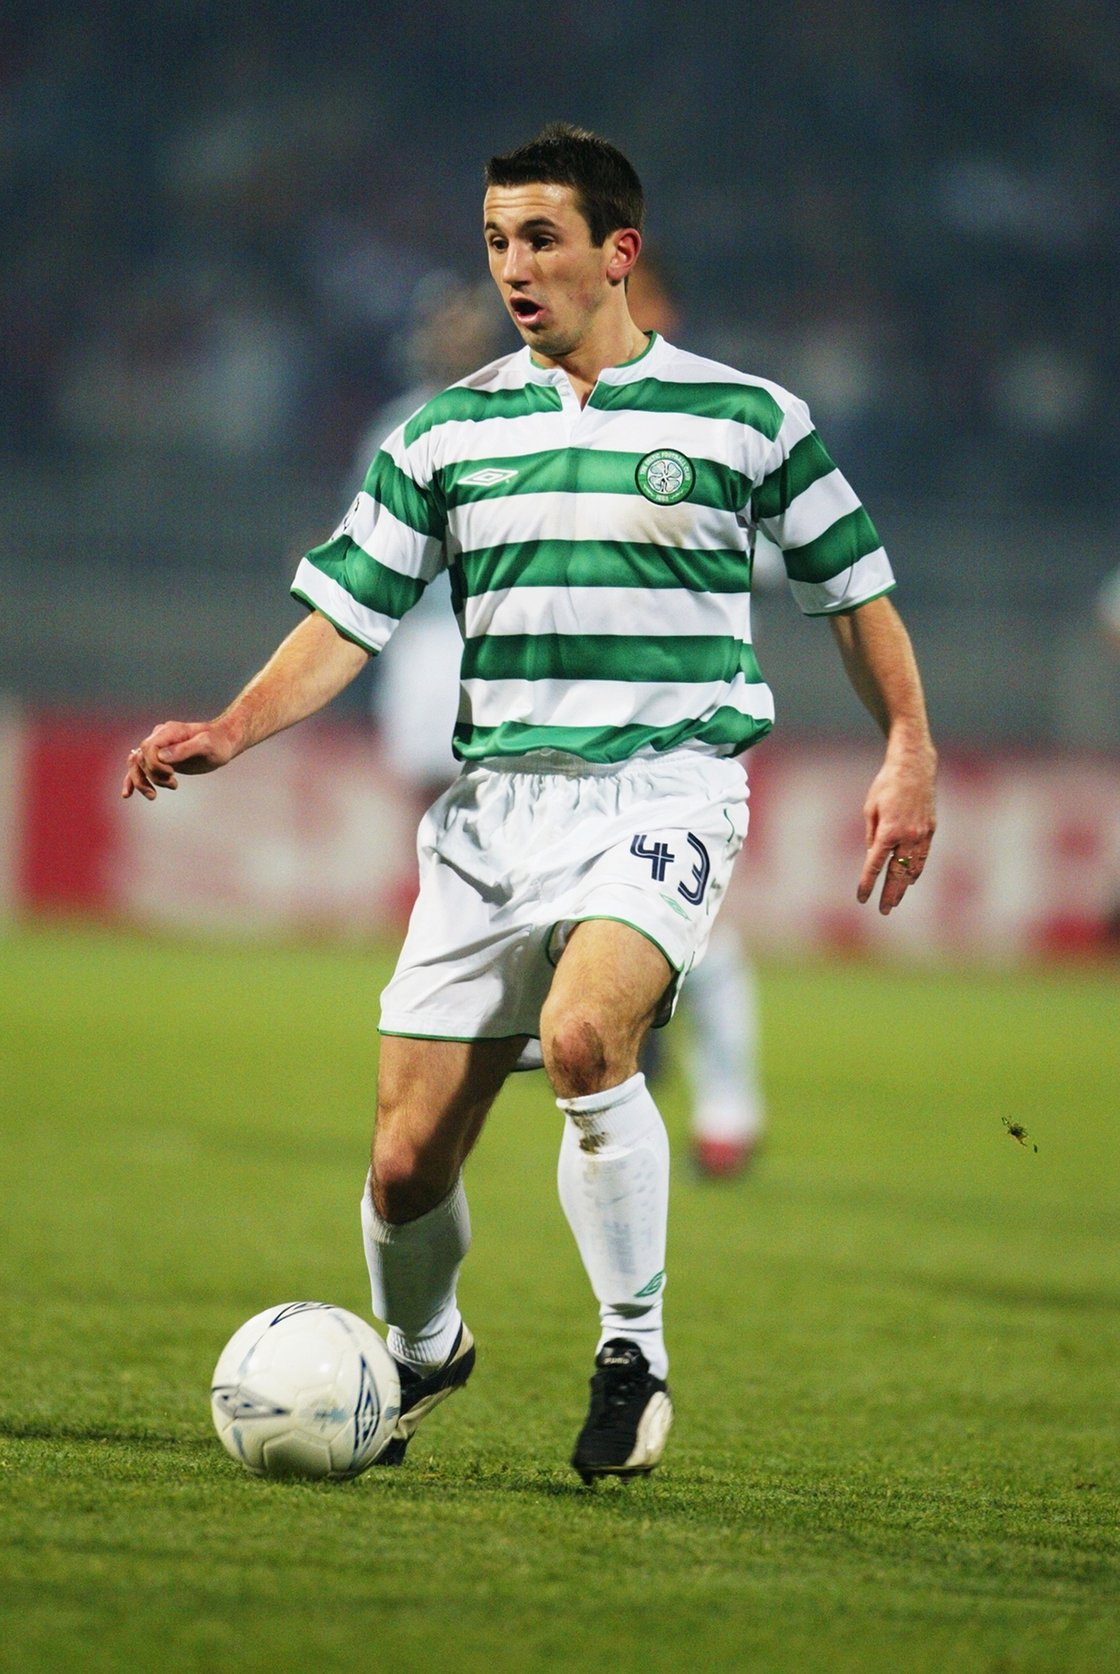 Image - Liam Miller facing Lyon in the Champions League in 2003